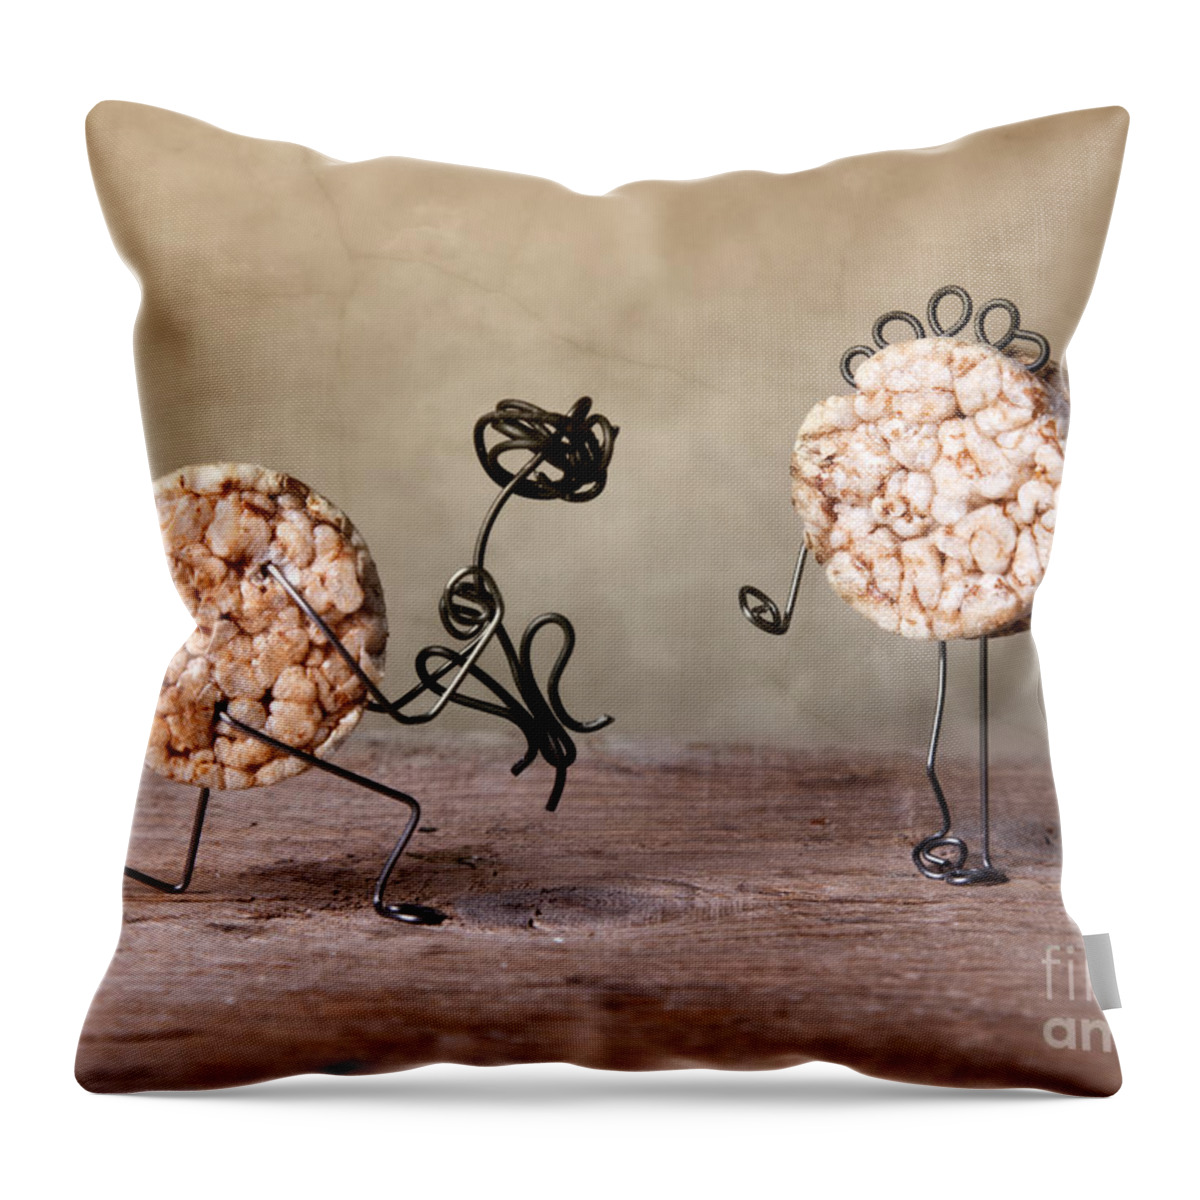 Body Throw Pillow featuring the photograph Simple Things 06 by Nailia Schwarz